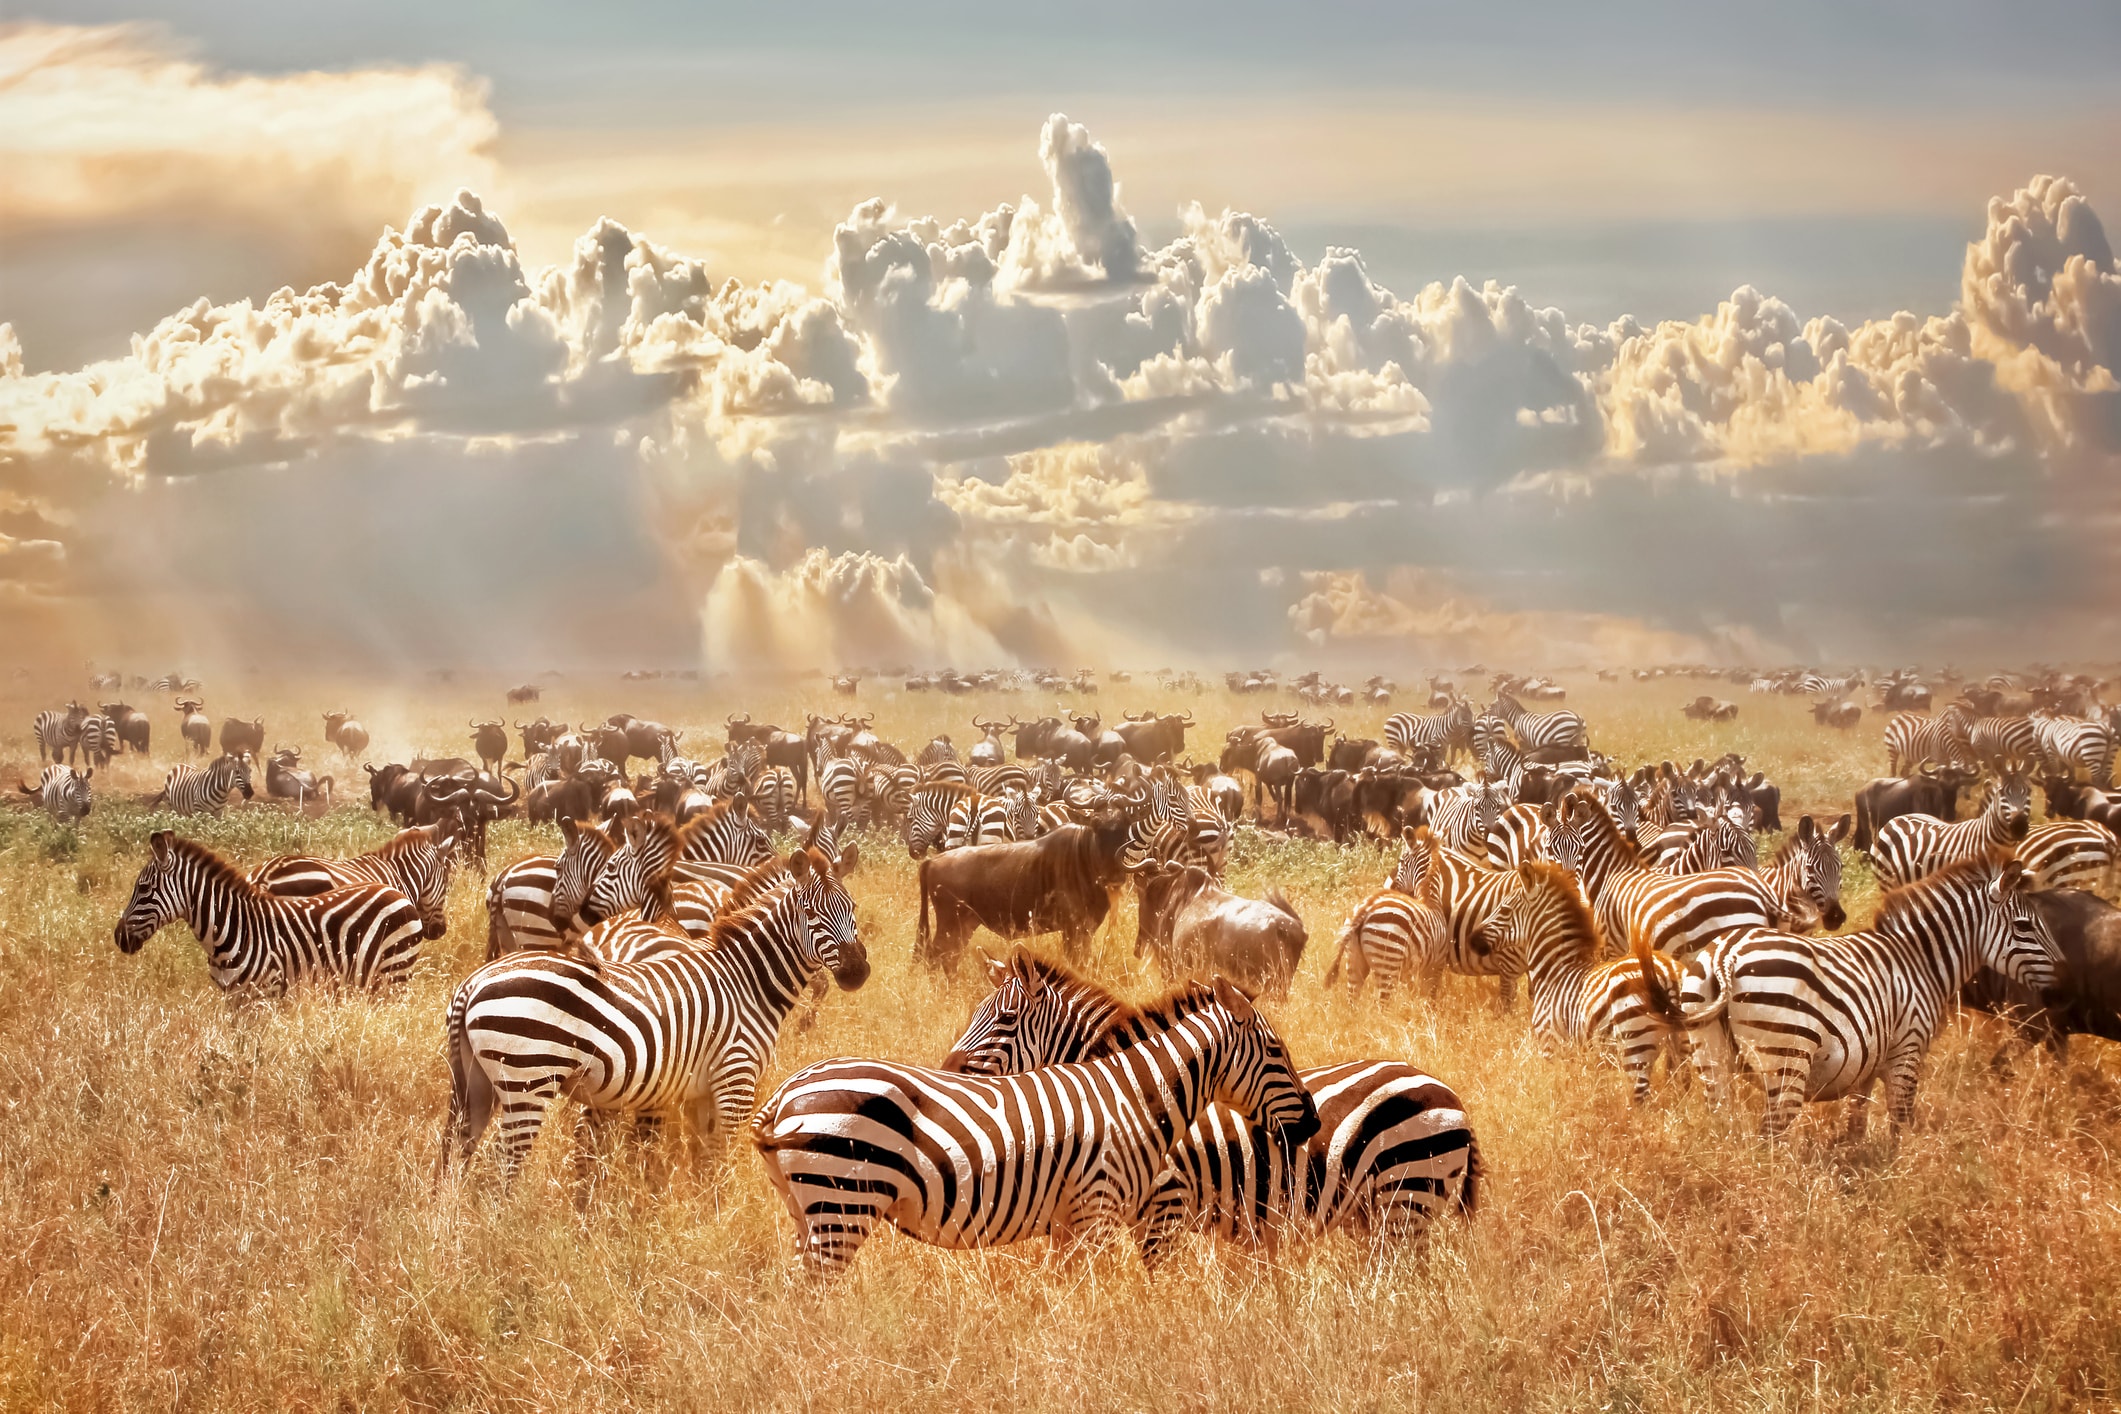 African wild zebras and wildebeest in the African savanna against a background of cumulus thunderclouds and the setting sun. Wild nature of Tanzania. Artistic natural image.